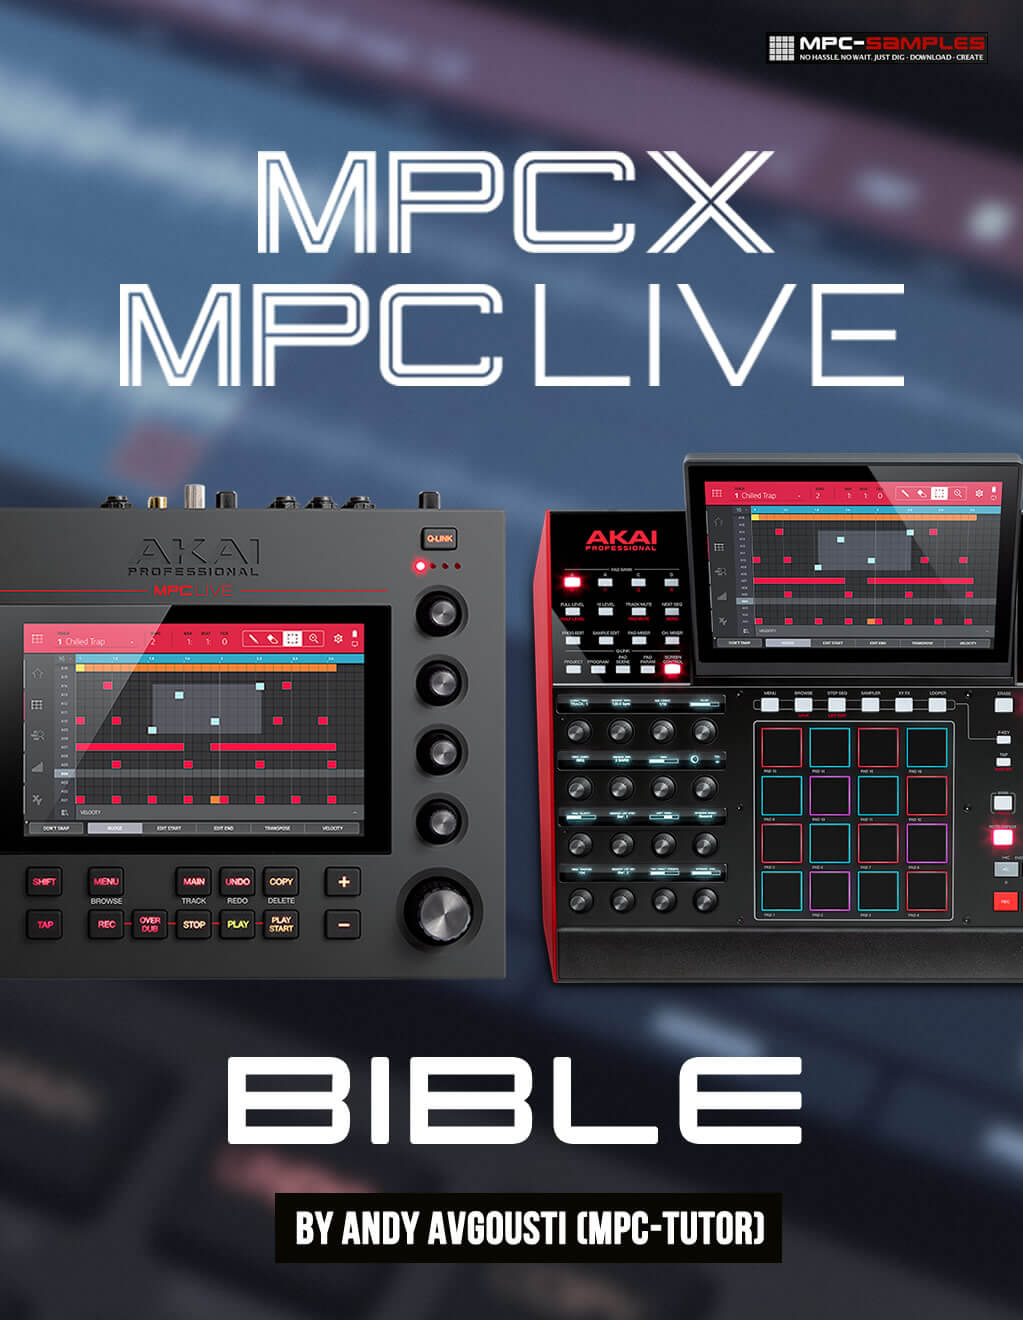 download the new version MPC-BE 1.6.9